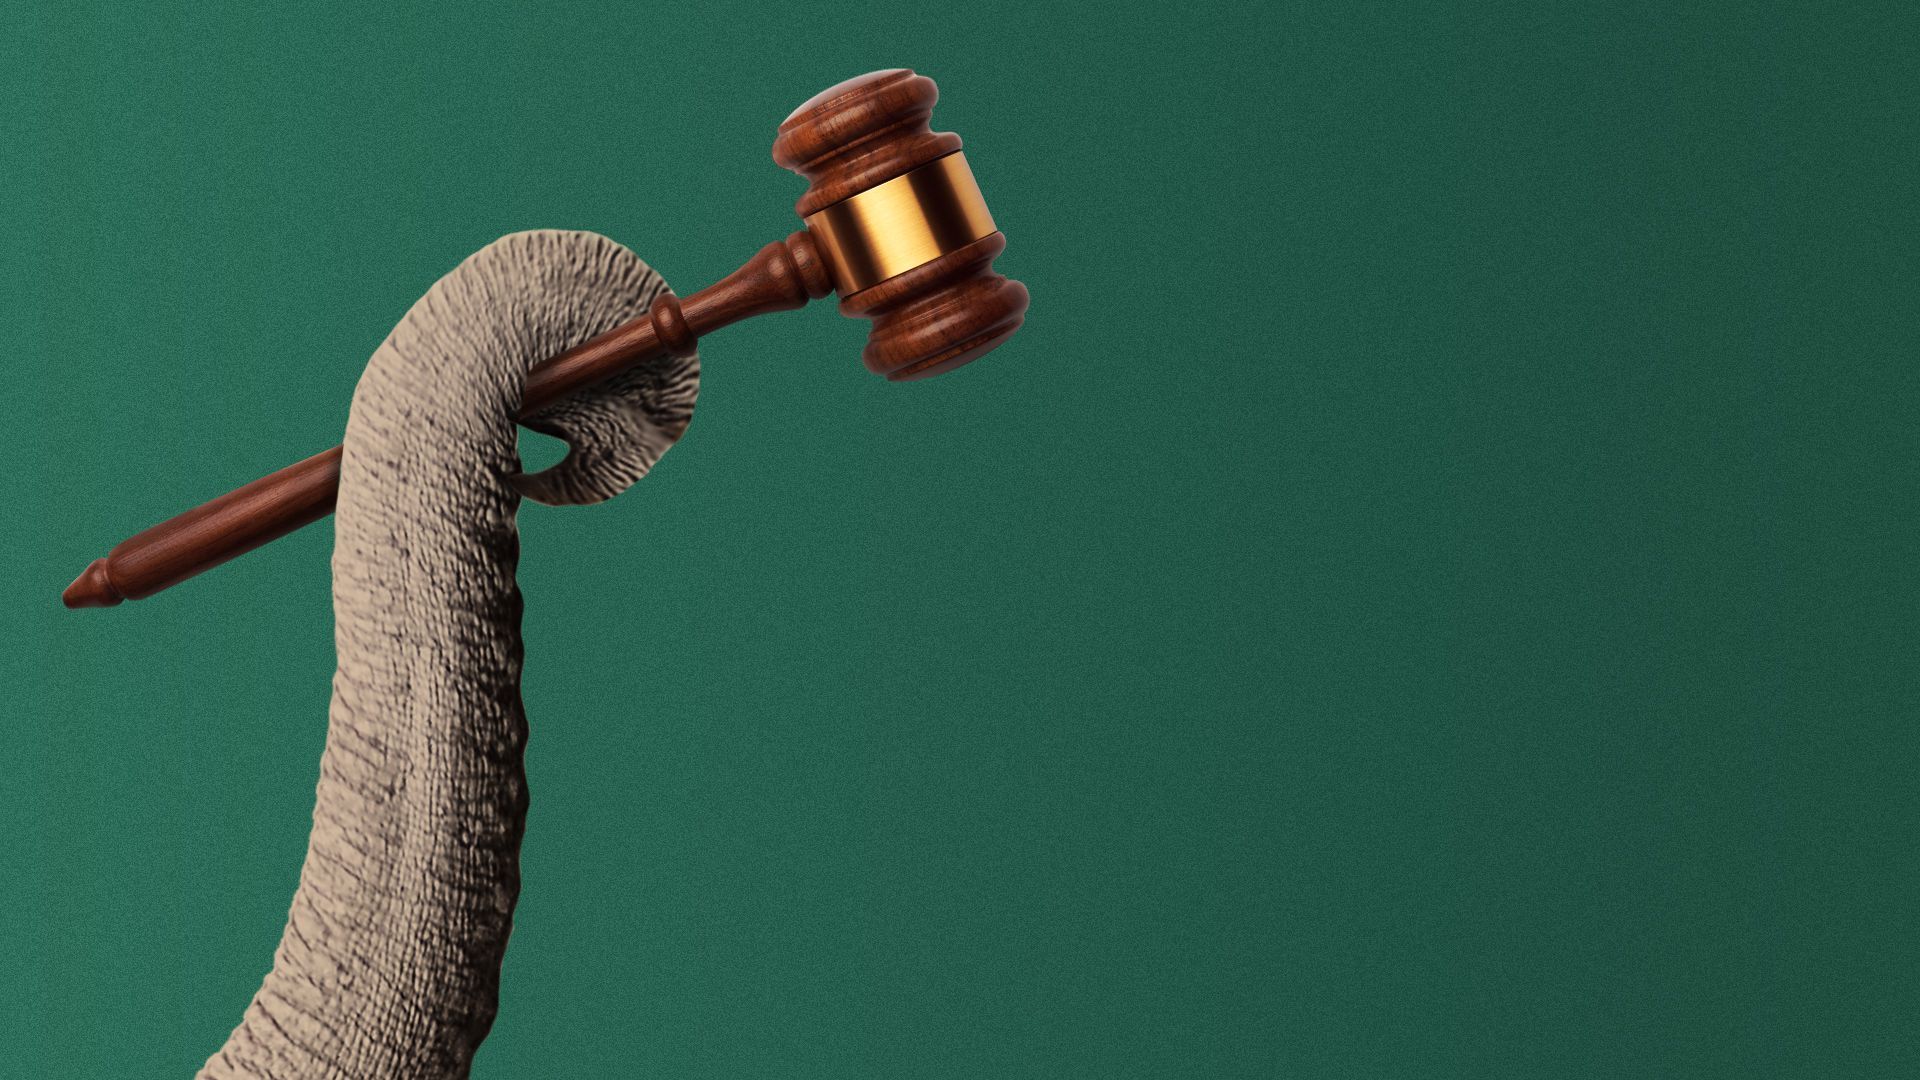 Illustration of an elephant’s trunk holding a gavel.